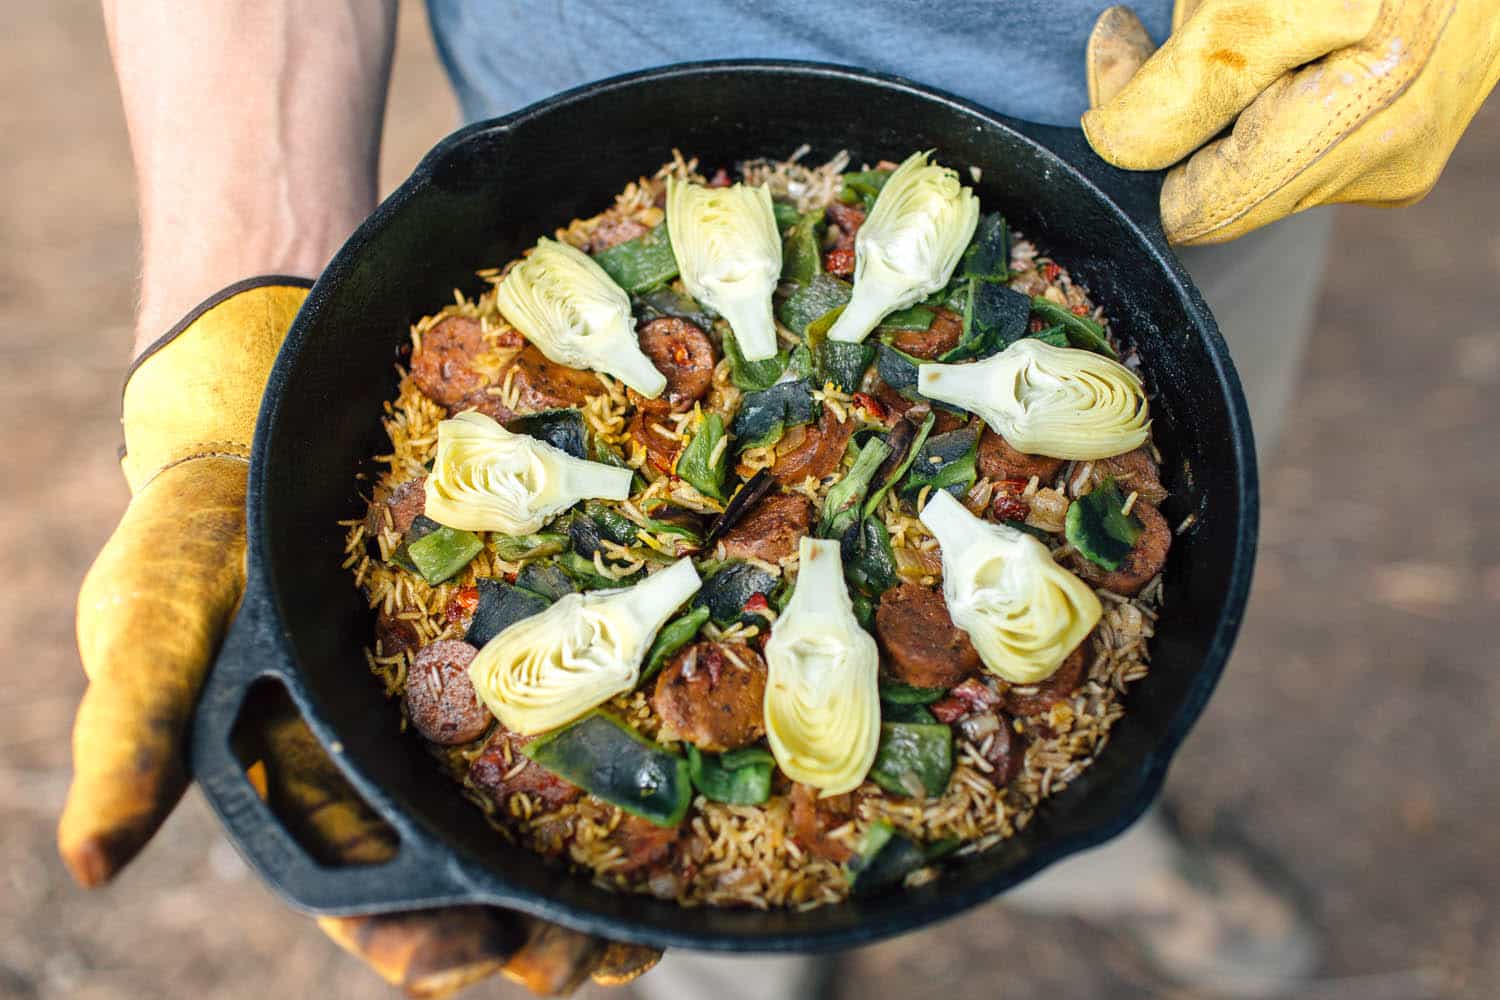 Michael holding a cast iron skillet filled with paella that is topped with artichoke hearts